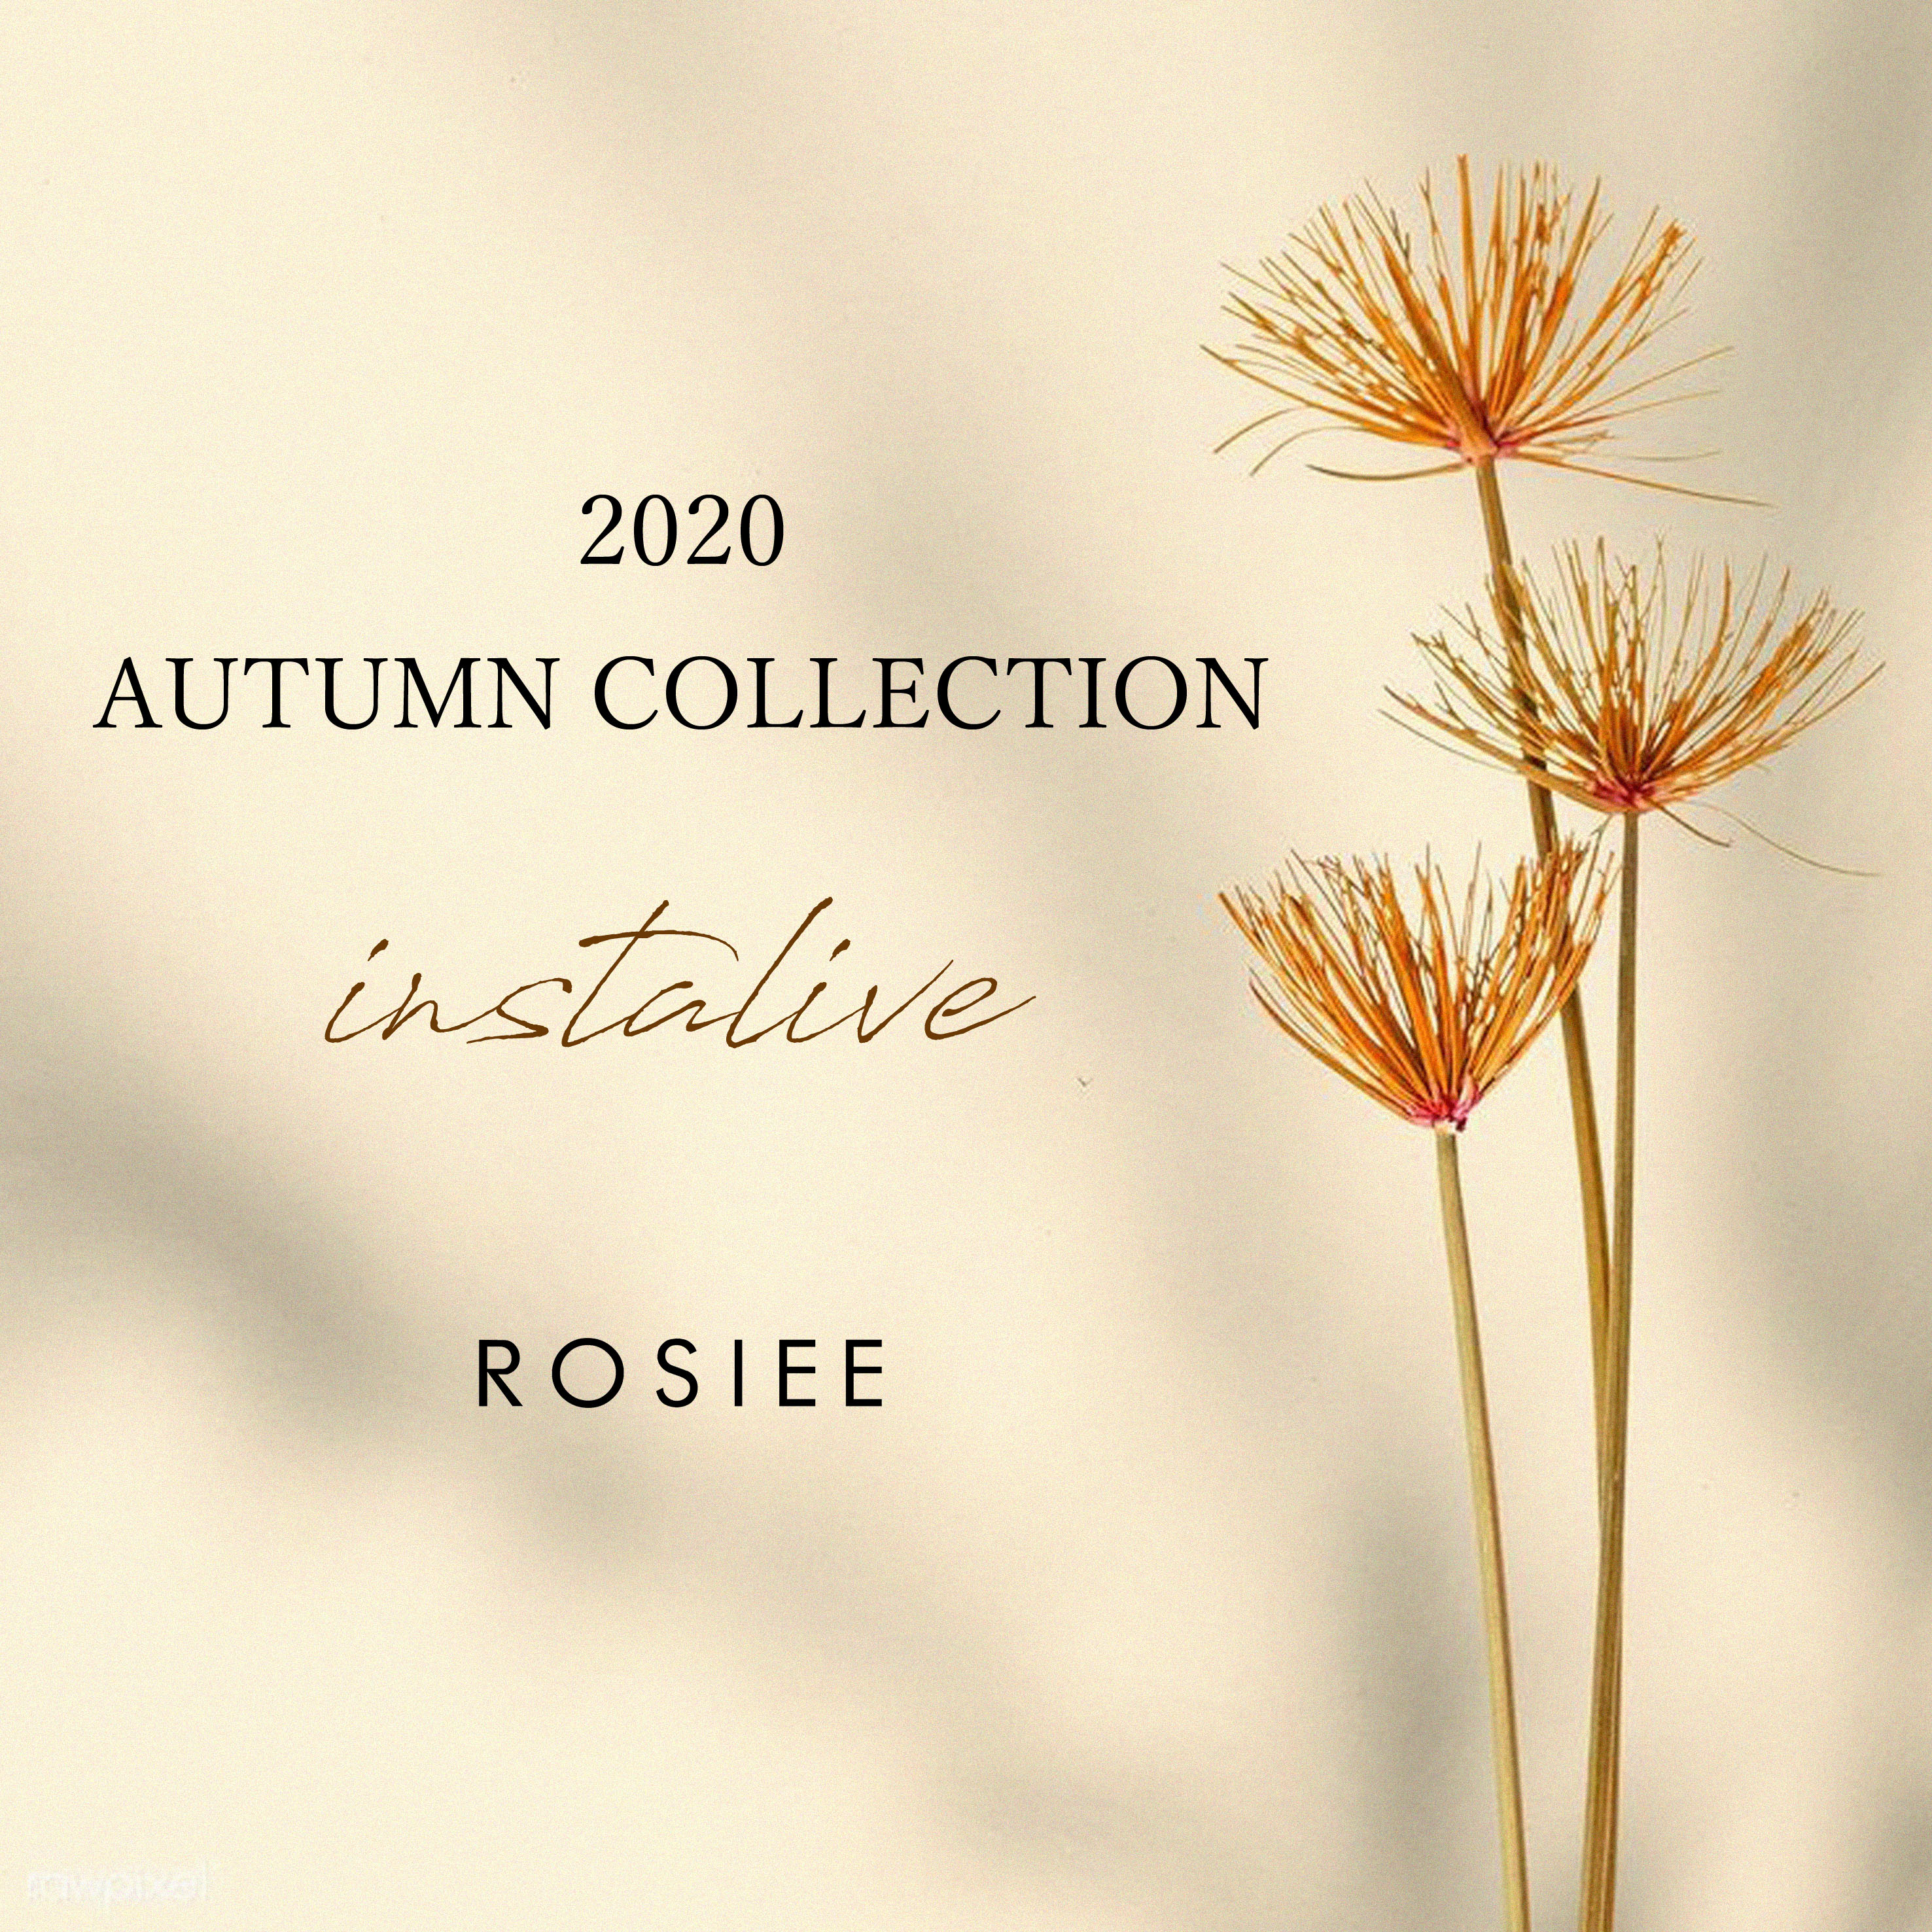 2020 AUTUMN COLLECTION☆instalive